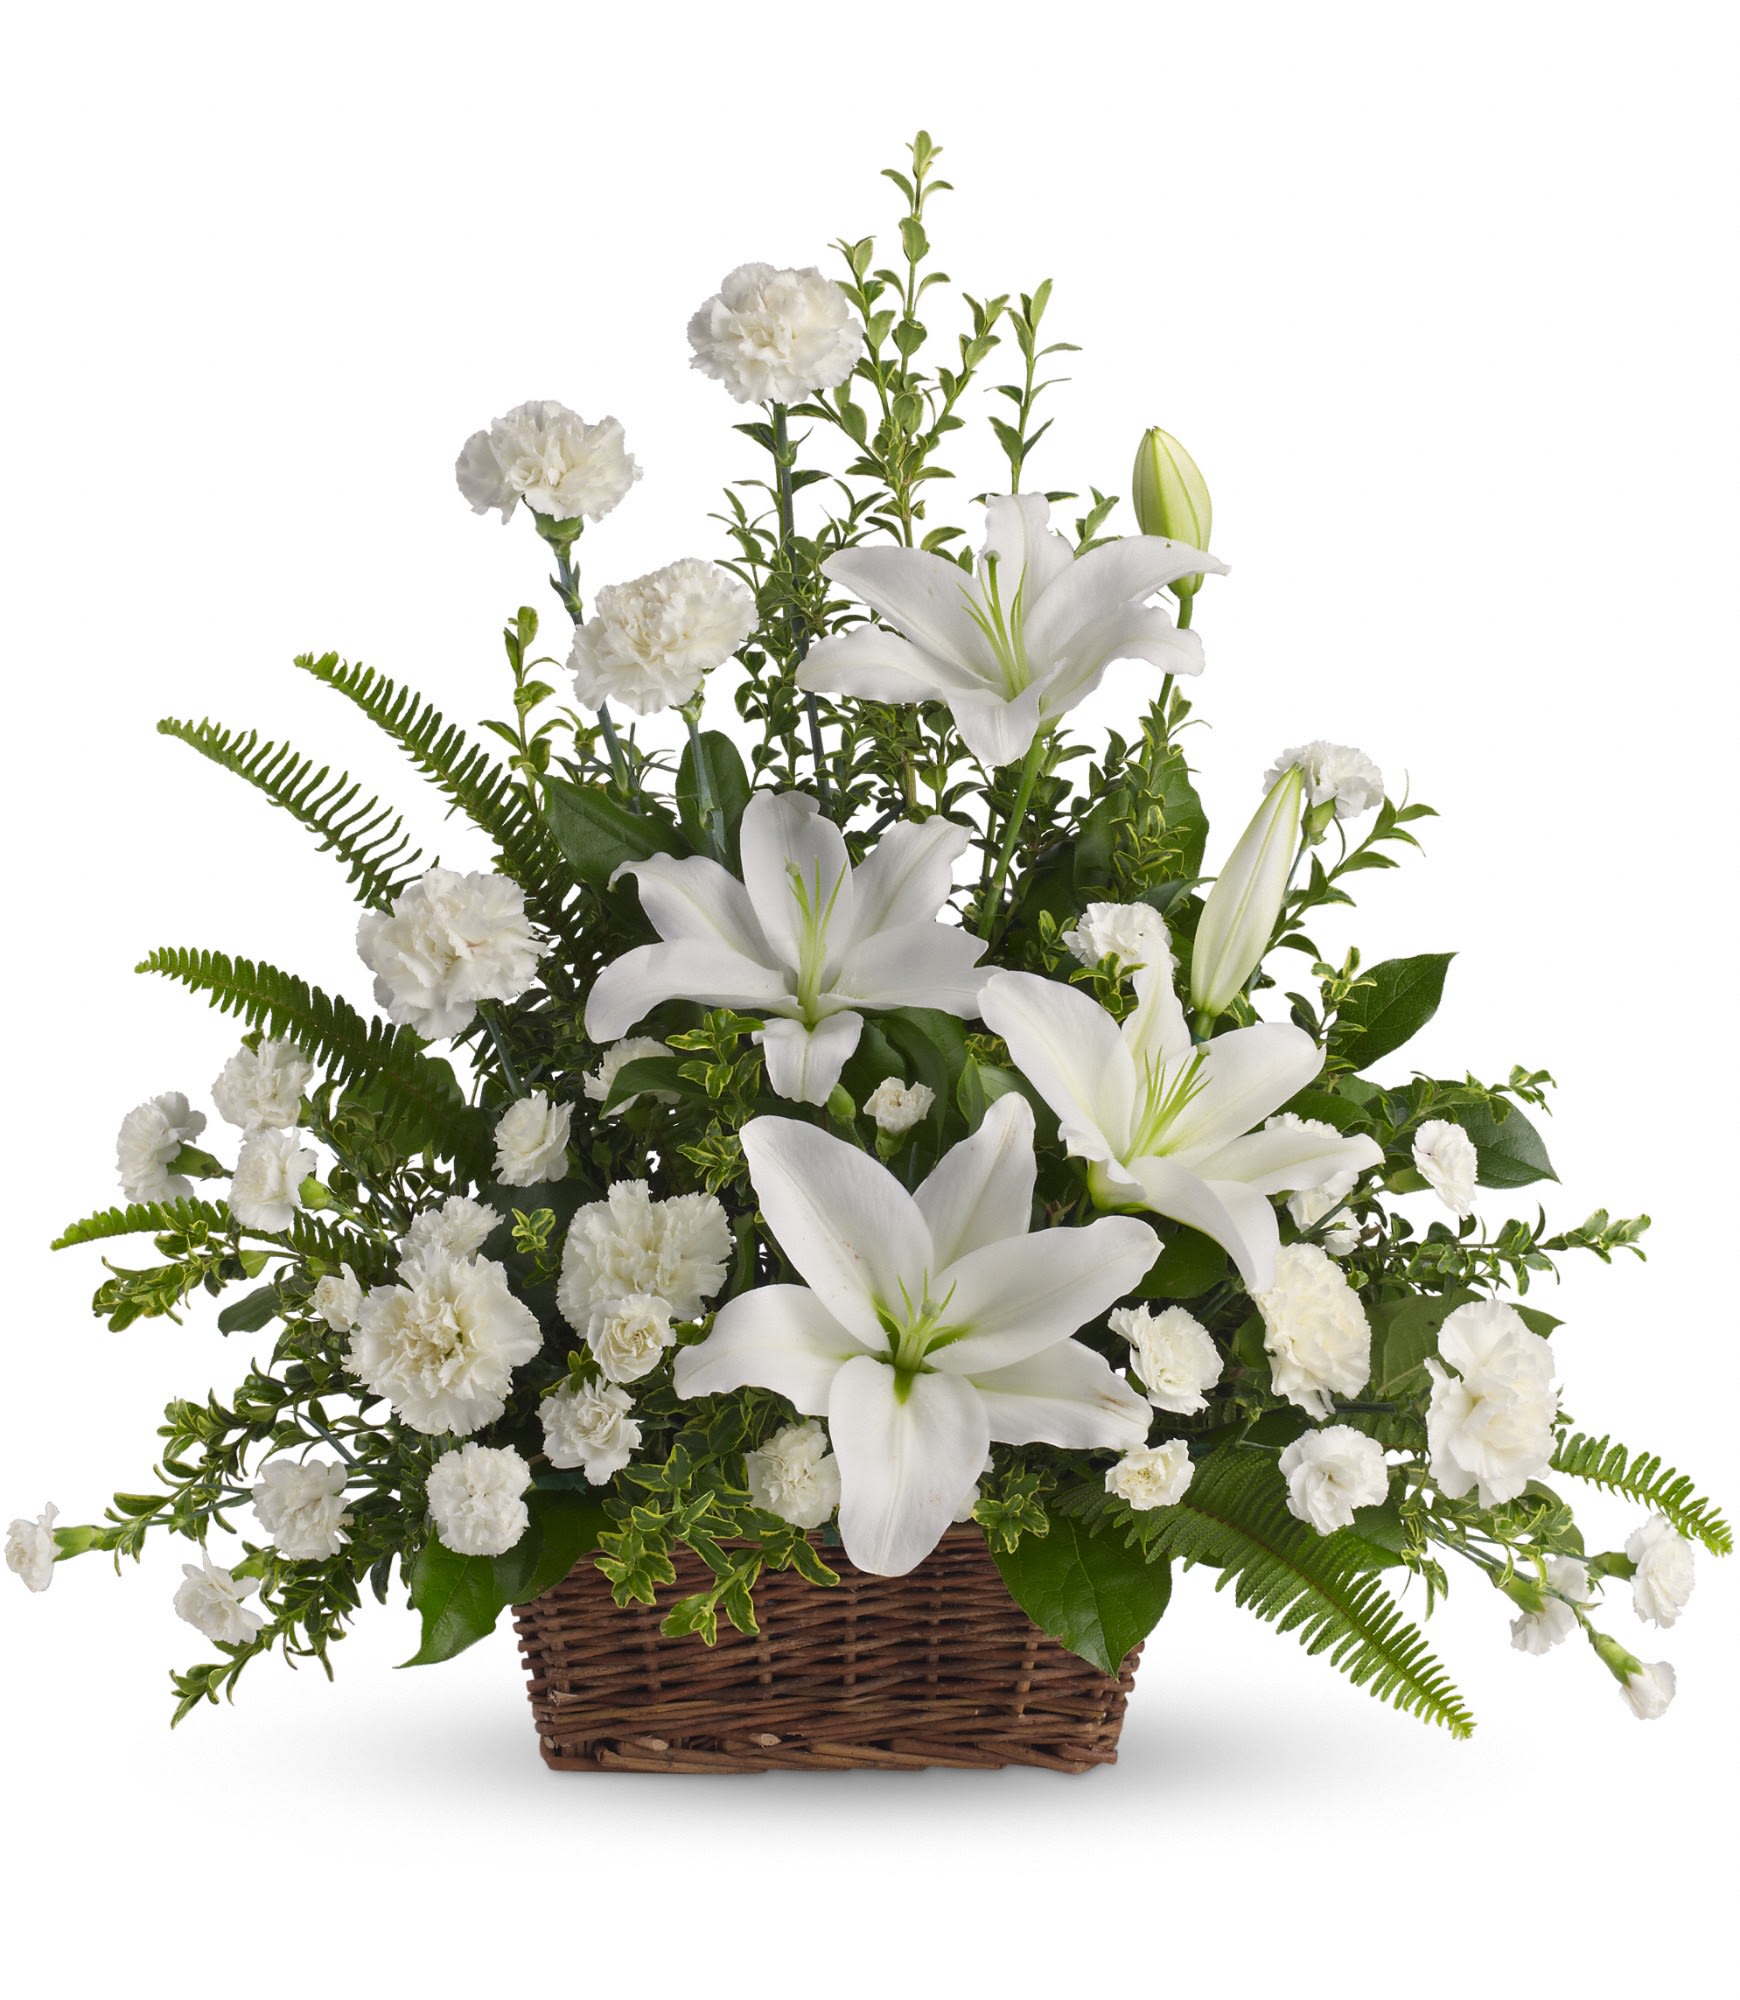 Peaceful White Lilies Basket - Whether you send this beautiful arrangement to the family home or to the service, all will appreciate its elegance and grace. The contrast of brilliant white blossoms and dazzling greenery create a wonderfully calm and dignified setting. 